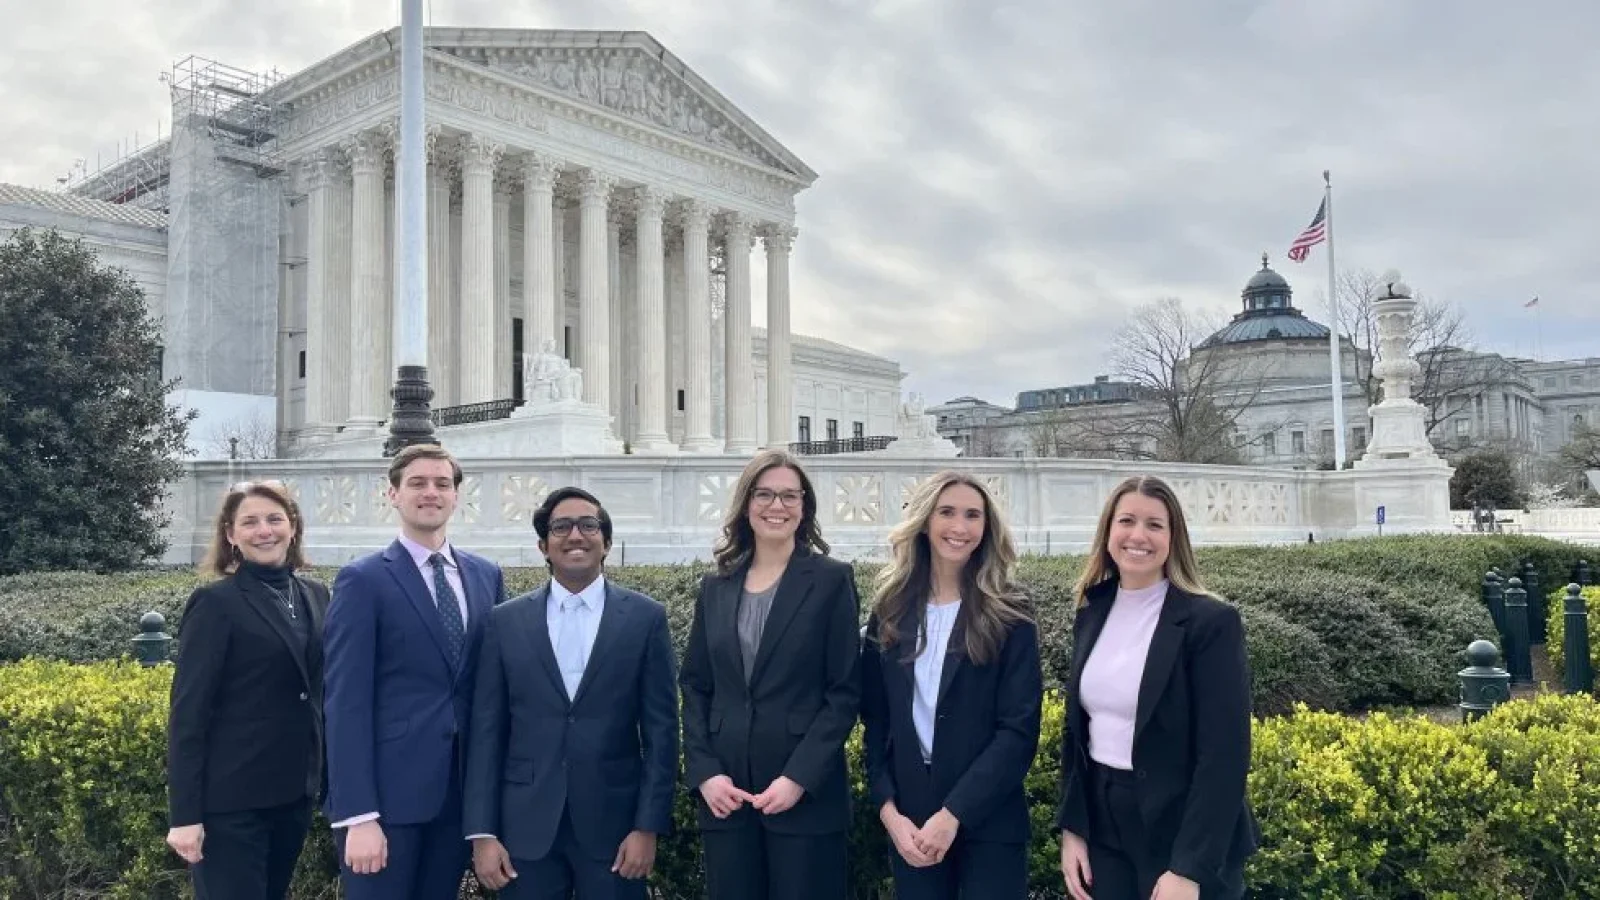 A group of law students stand in front of the columns of the Supreme Court.